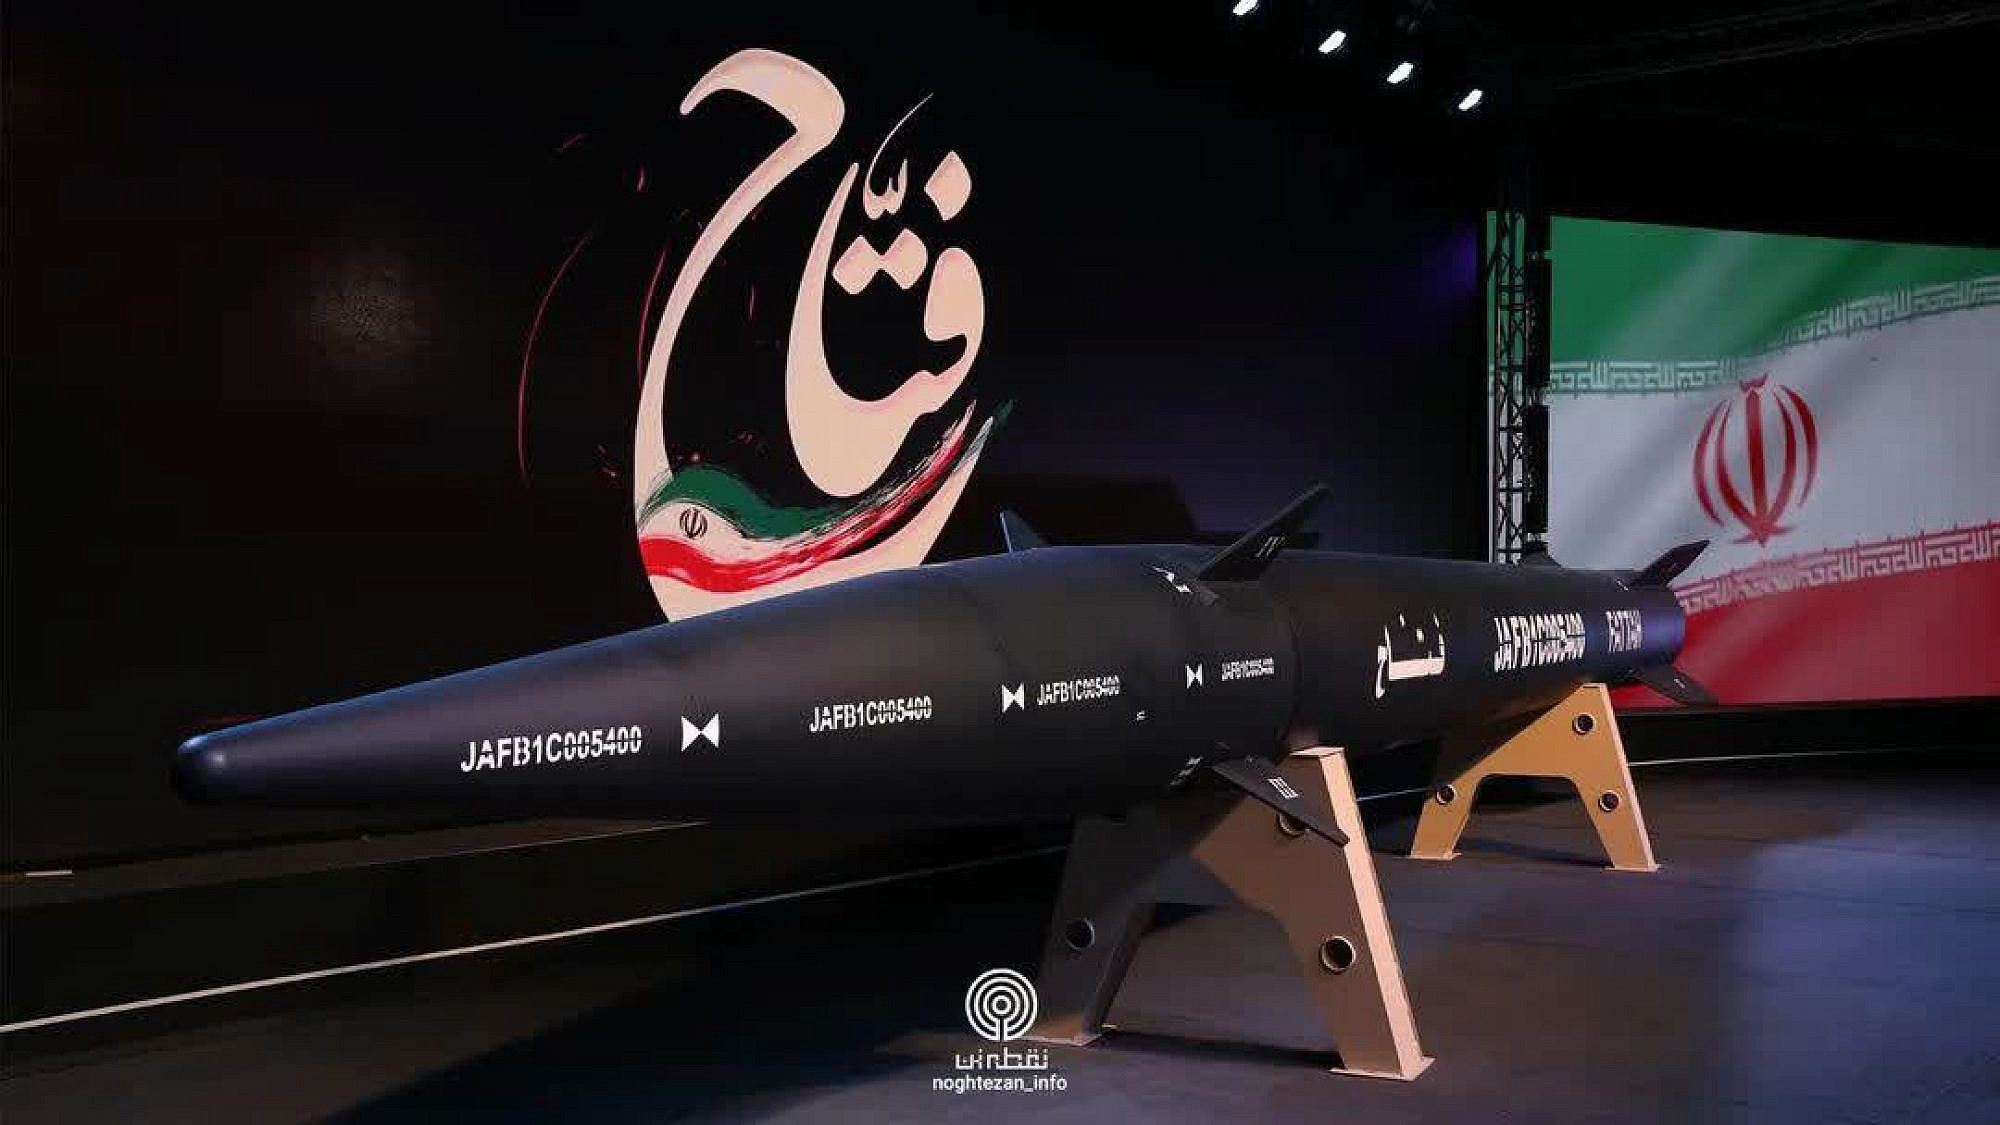 Iran's "Fattah" hypersonic missile. Source: Twitter